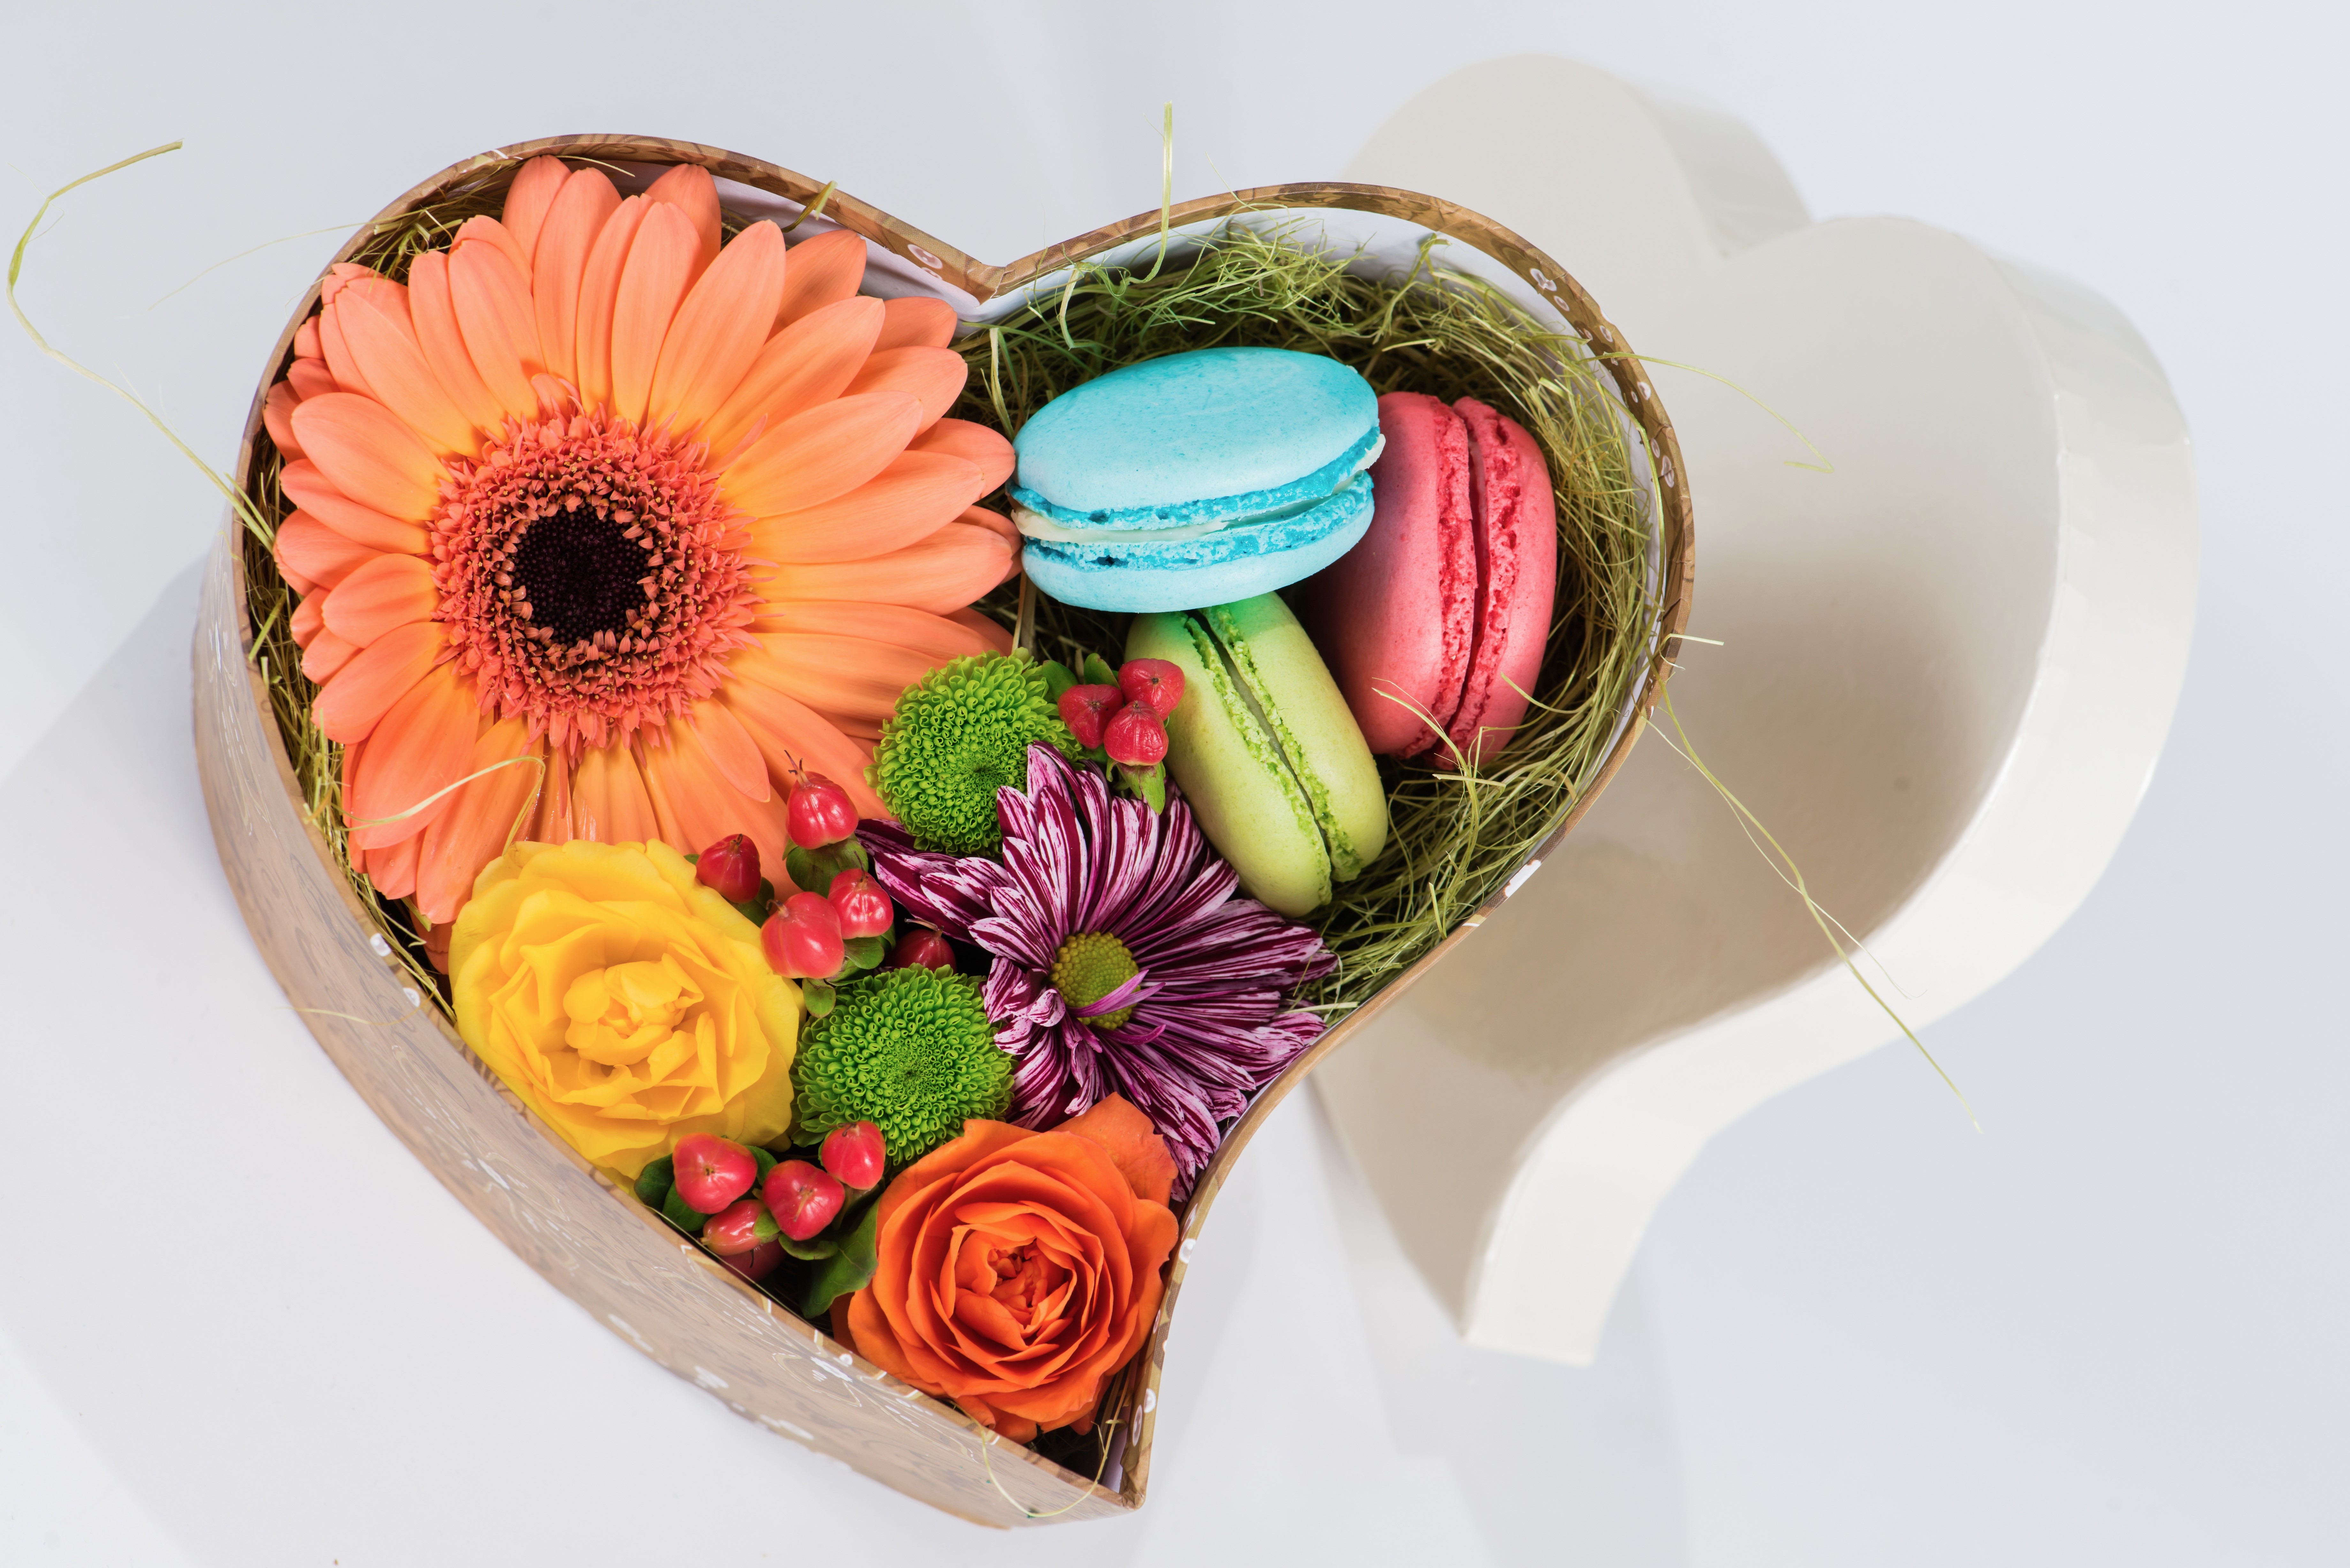 Colorful Flower Heart Shaped Macaron Still Life 7360x4912